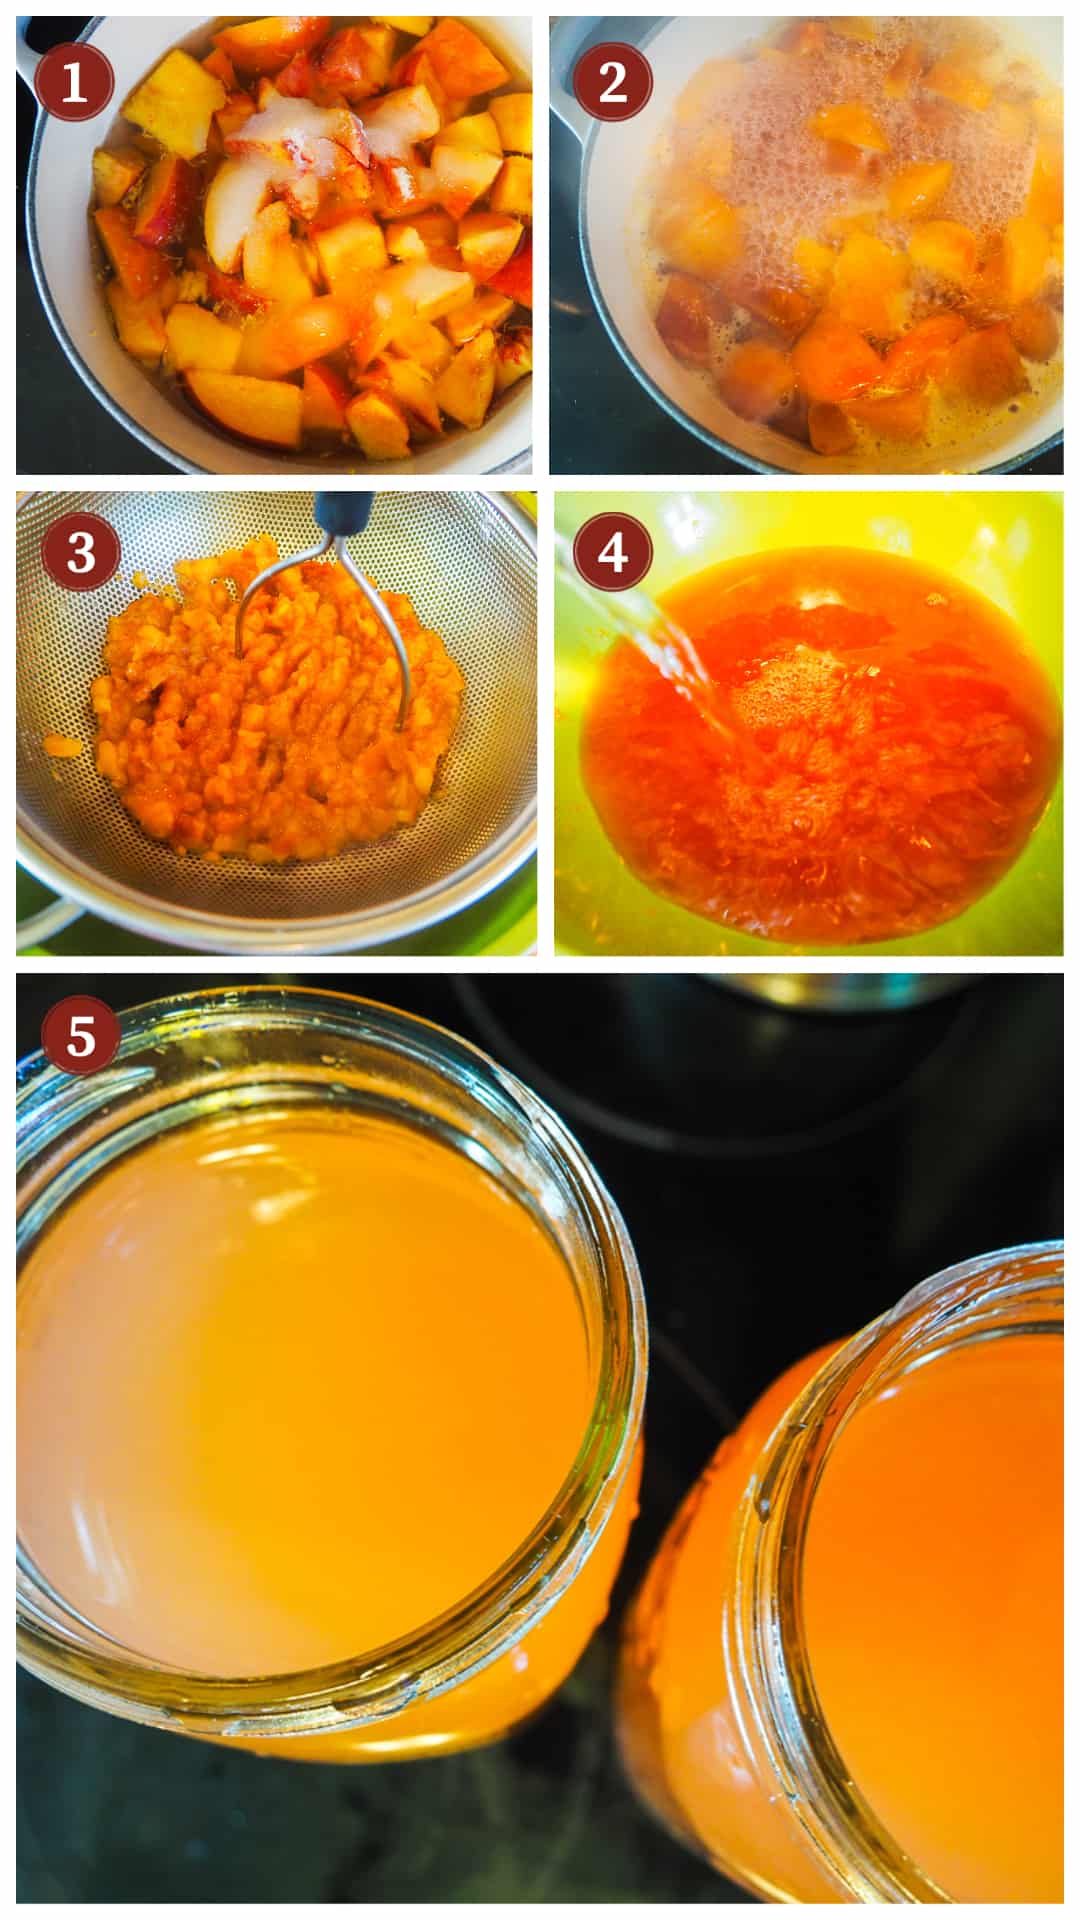 A collage of images showing the process of making peach lemonade on the stove, steps 1 - 5.